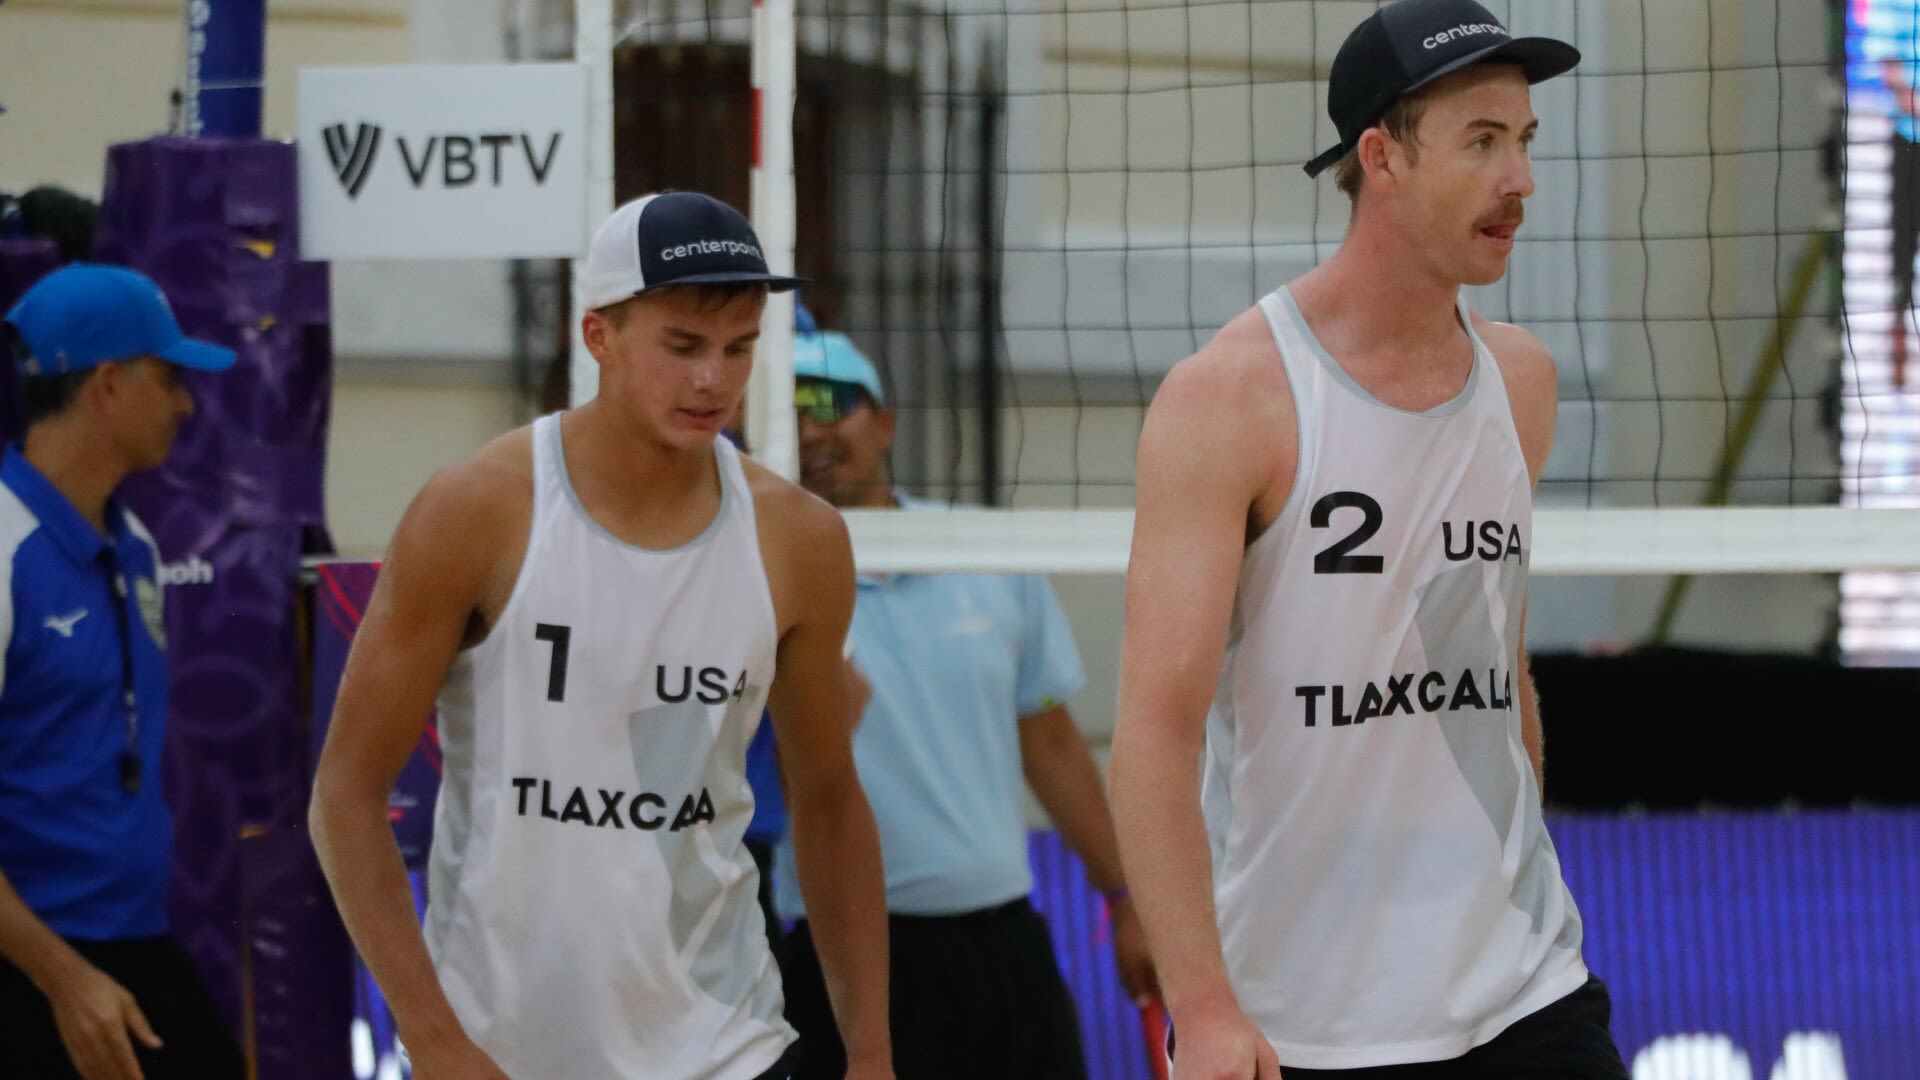 In rapid rise, Andy Benesh, Miles Partain climb atop U.S. men's beach volleyball, reach Olympics